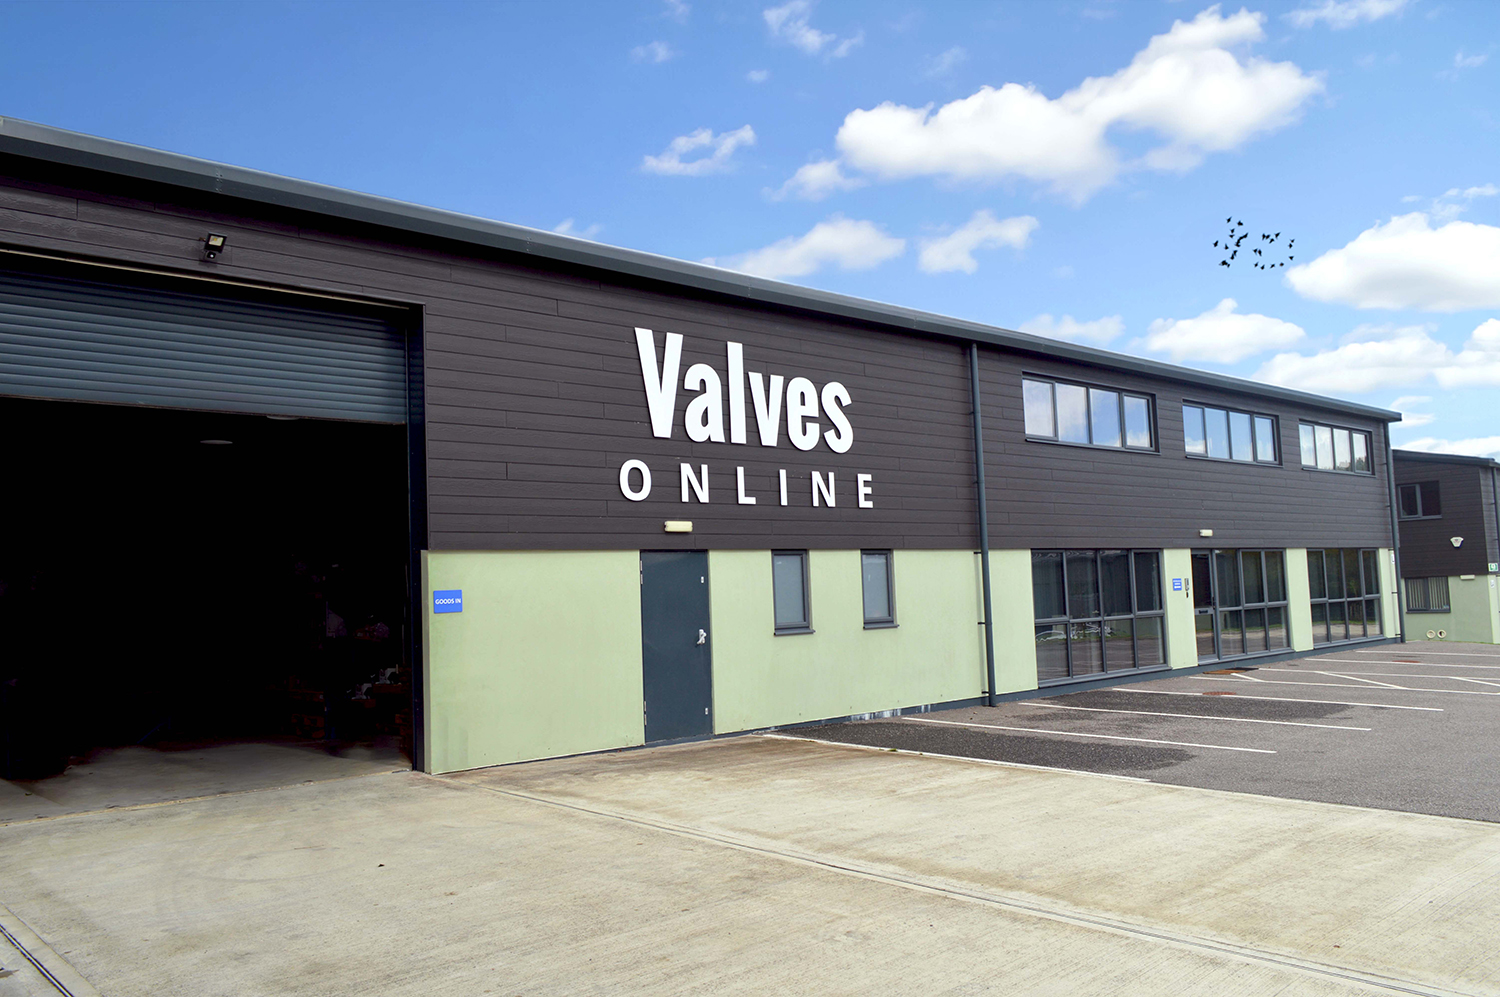 Valves Online was founded in 2003 and has become the UK’s most well-known online valves supplier.